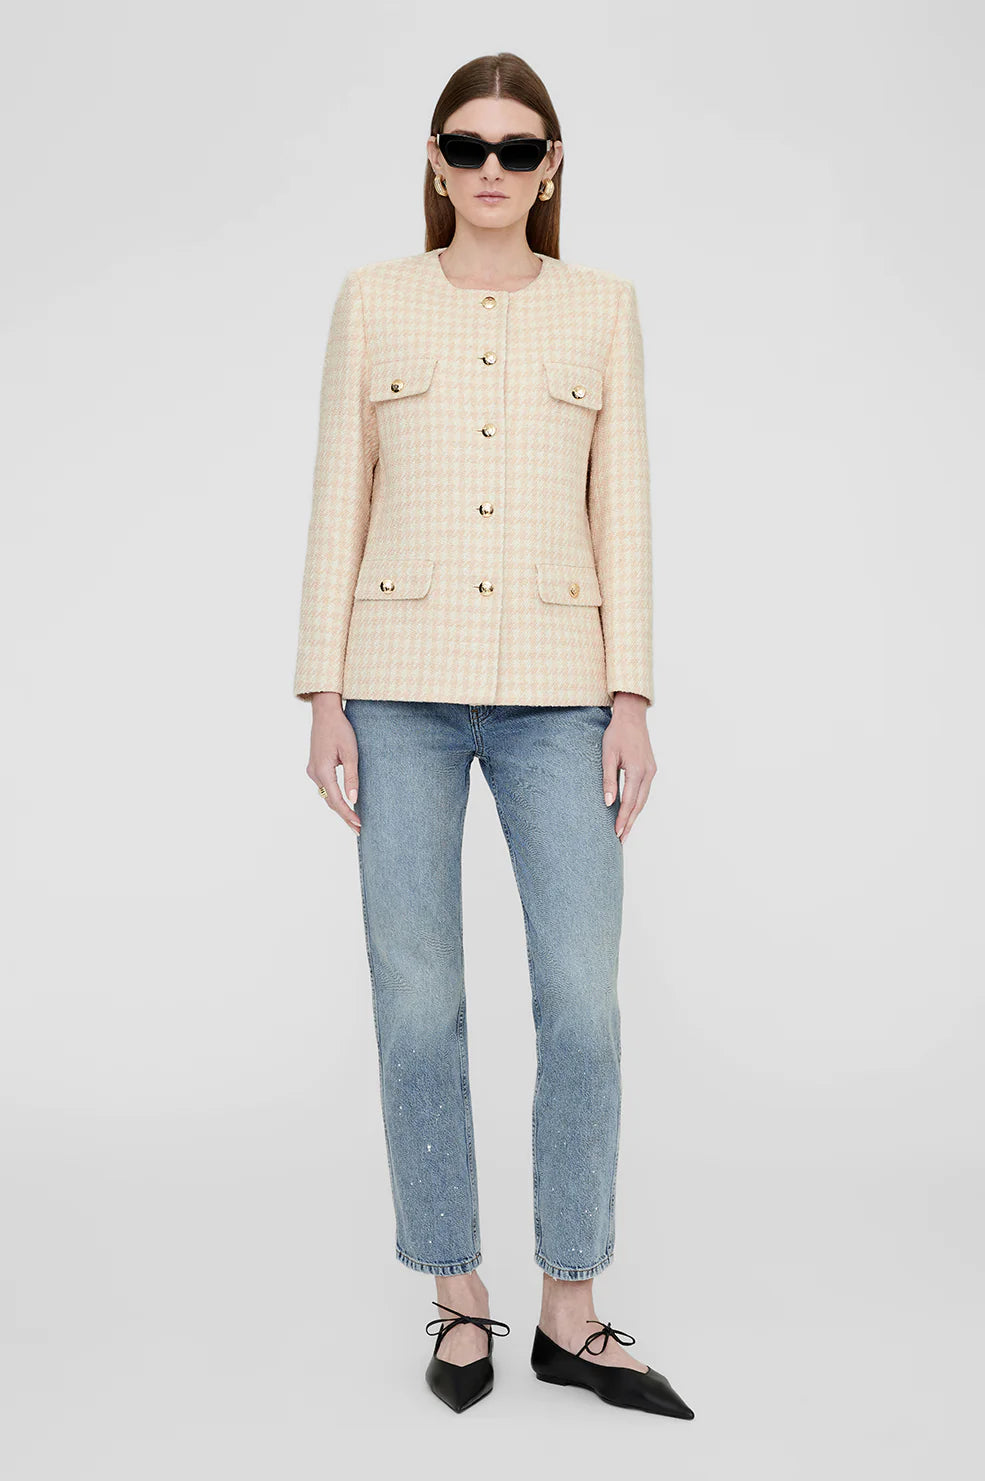 Anine Bing Janet Jacket - Cream And Peach Houndstooth